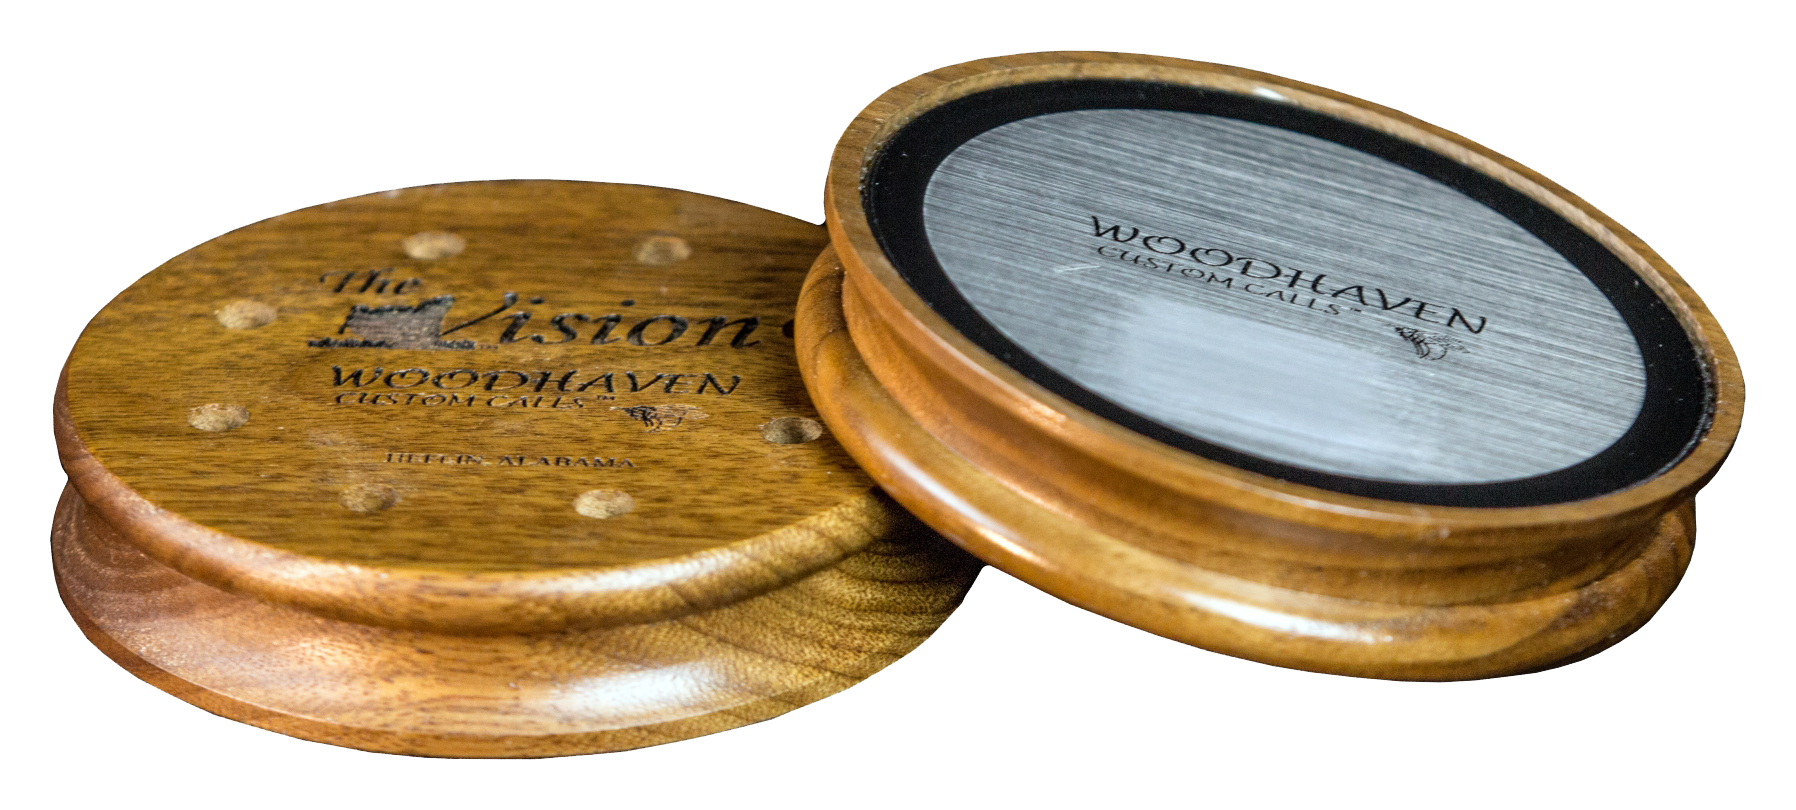 WoodHaven Custom Calls The Vision Crystal Friction Turkey Call